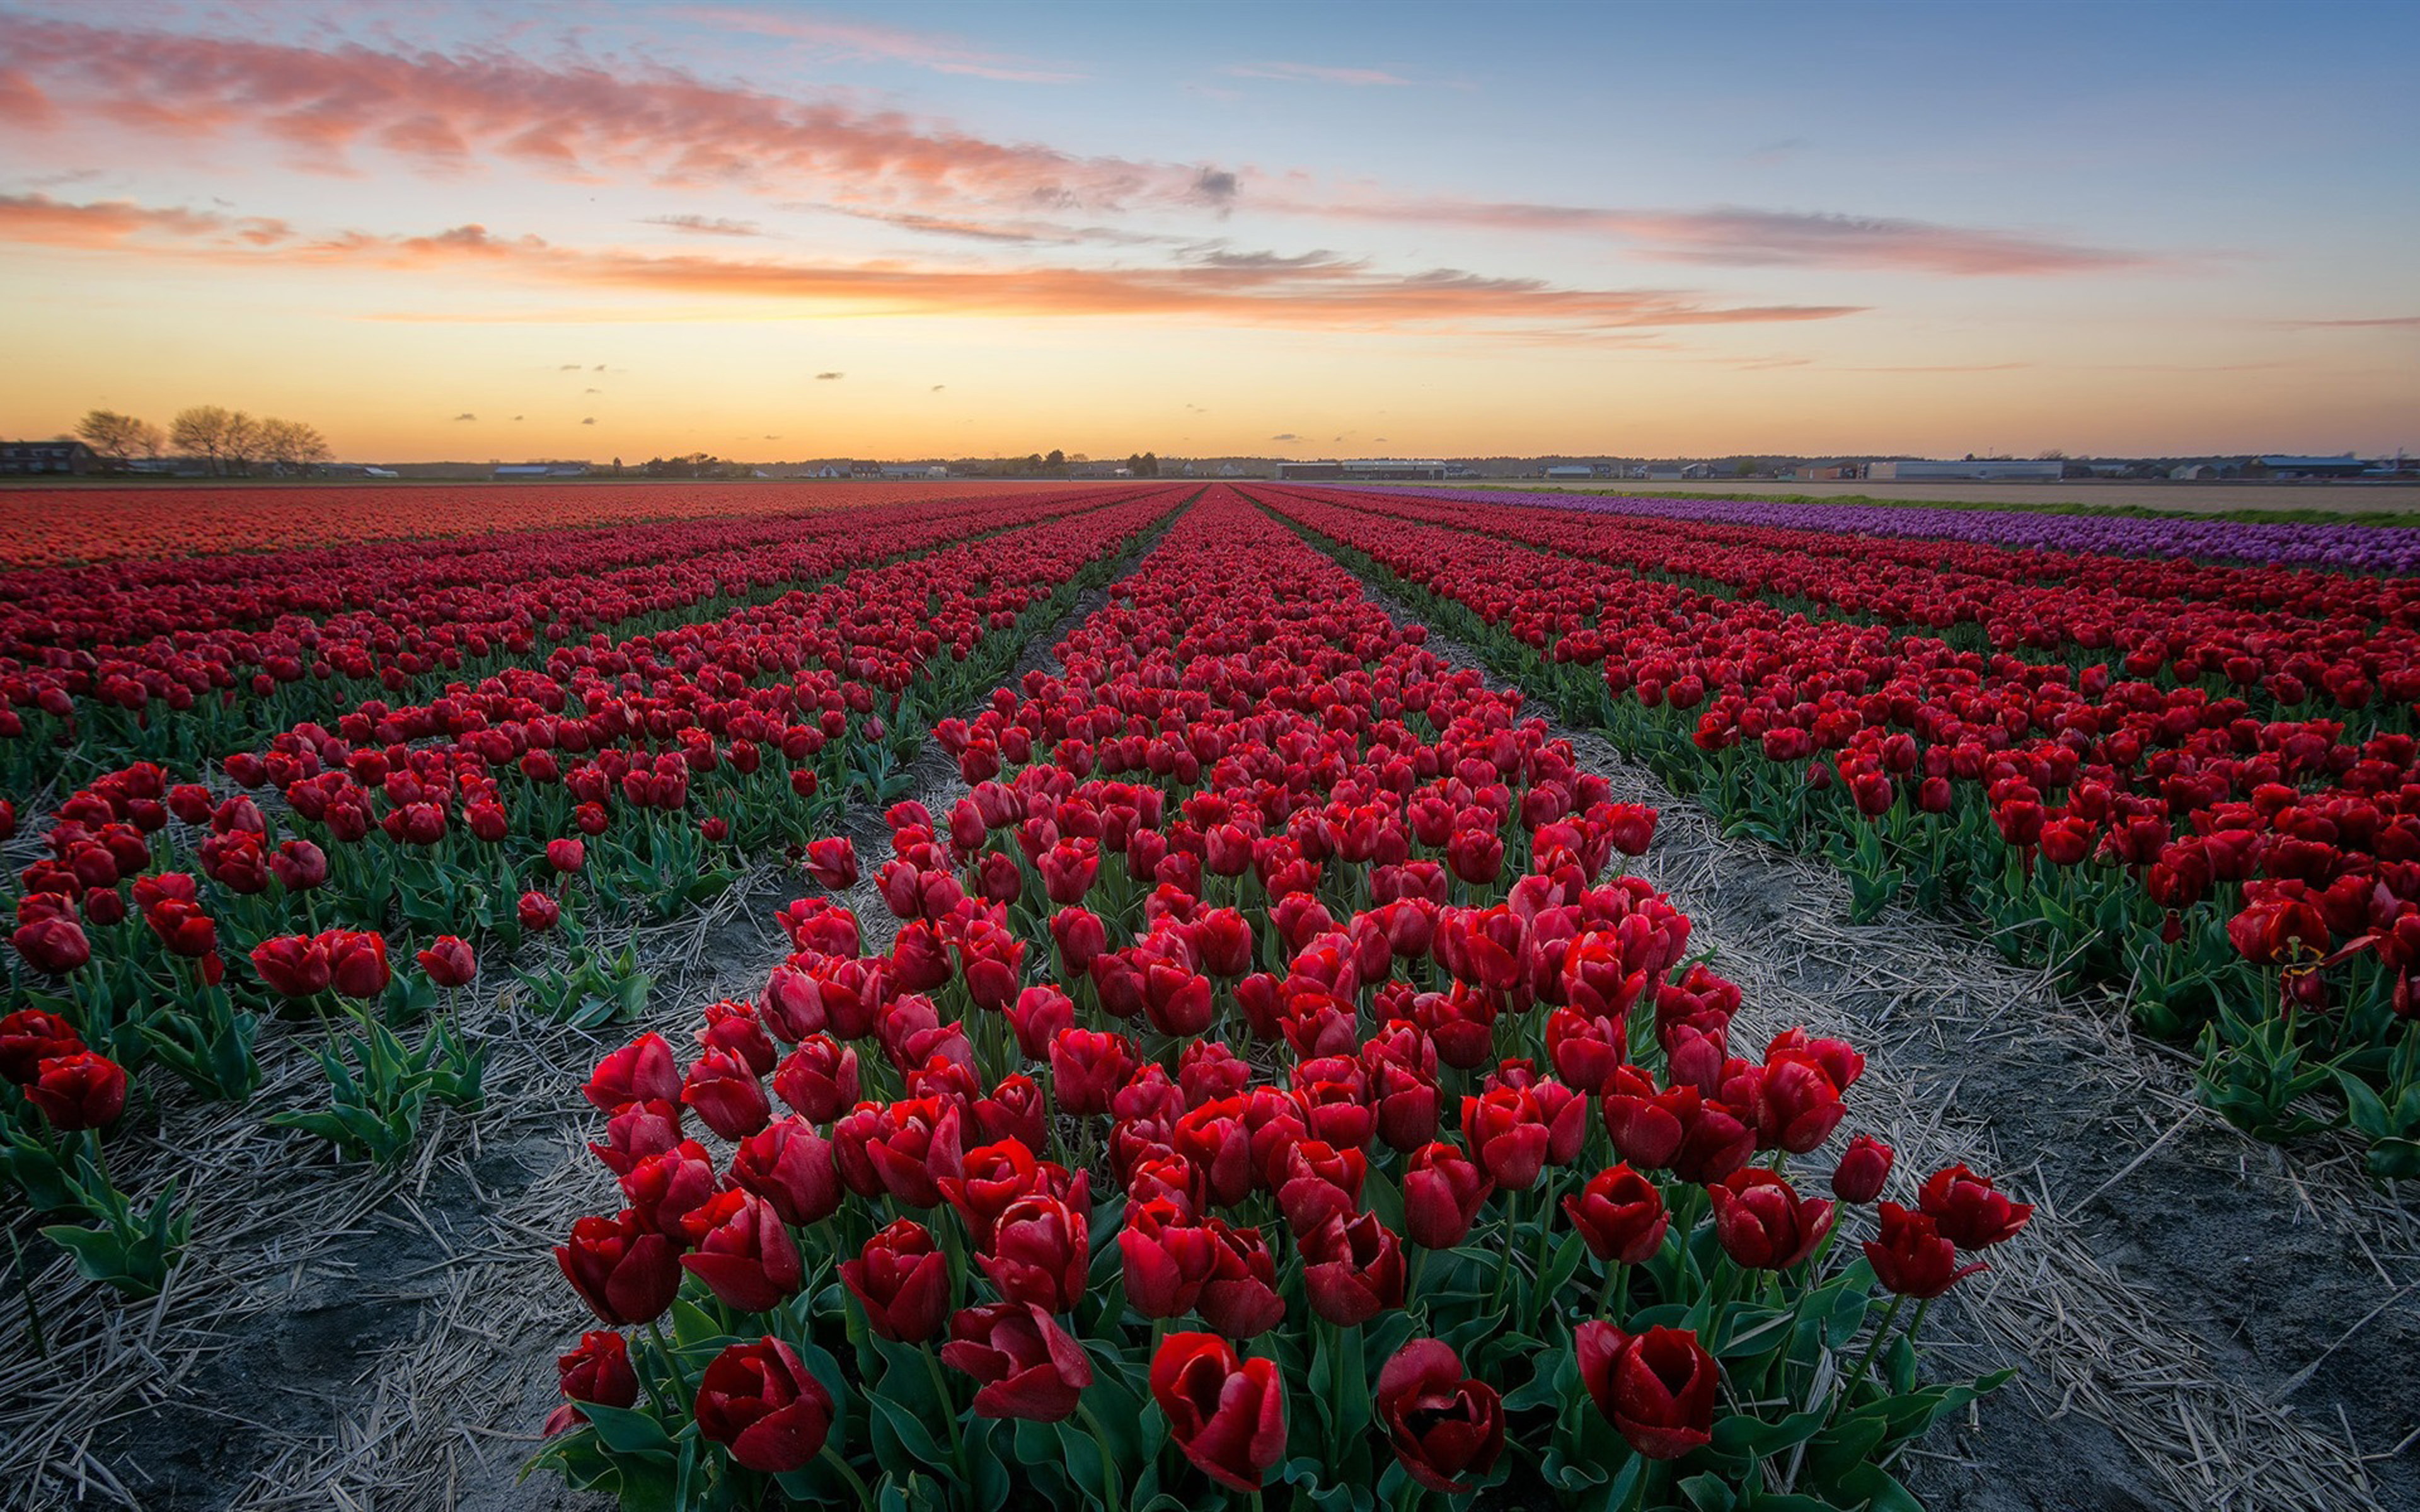 Field With Red Tulips Netherlands 4k Hd Desktop Wallpaper And Hd Tv